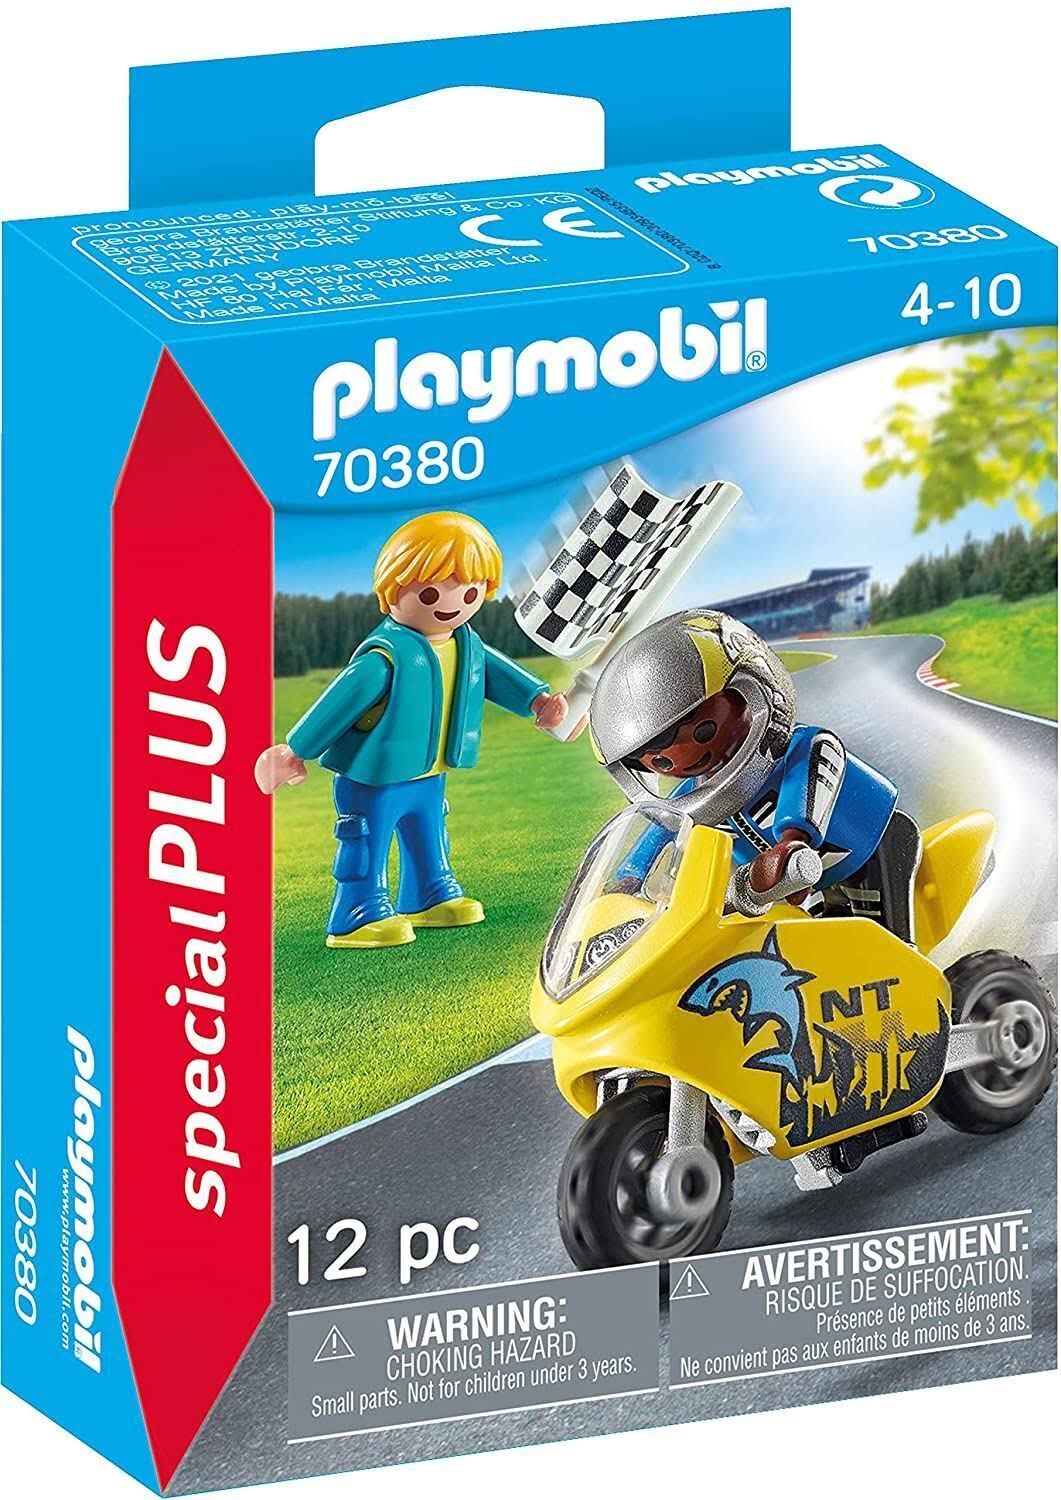 Playmobil - 70380 Special Plus Boys with Motorcycle